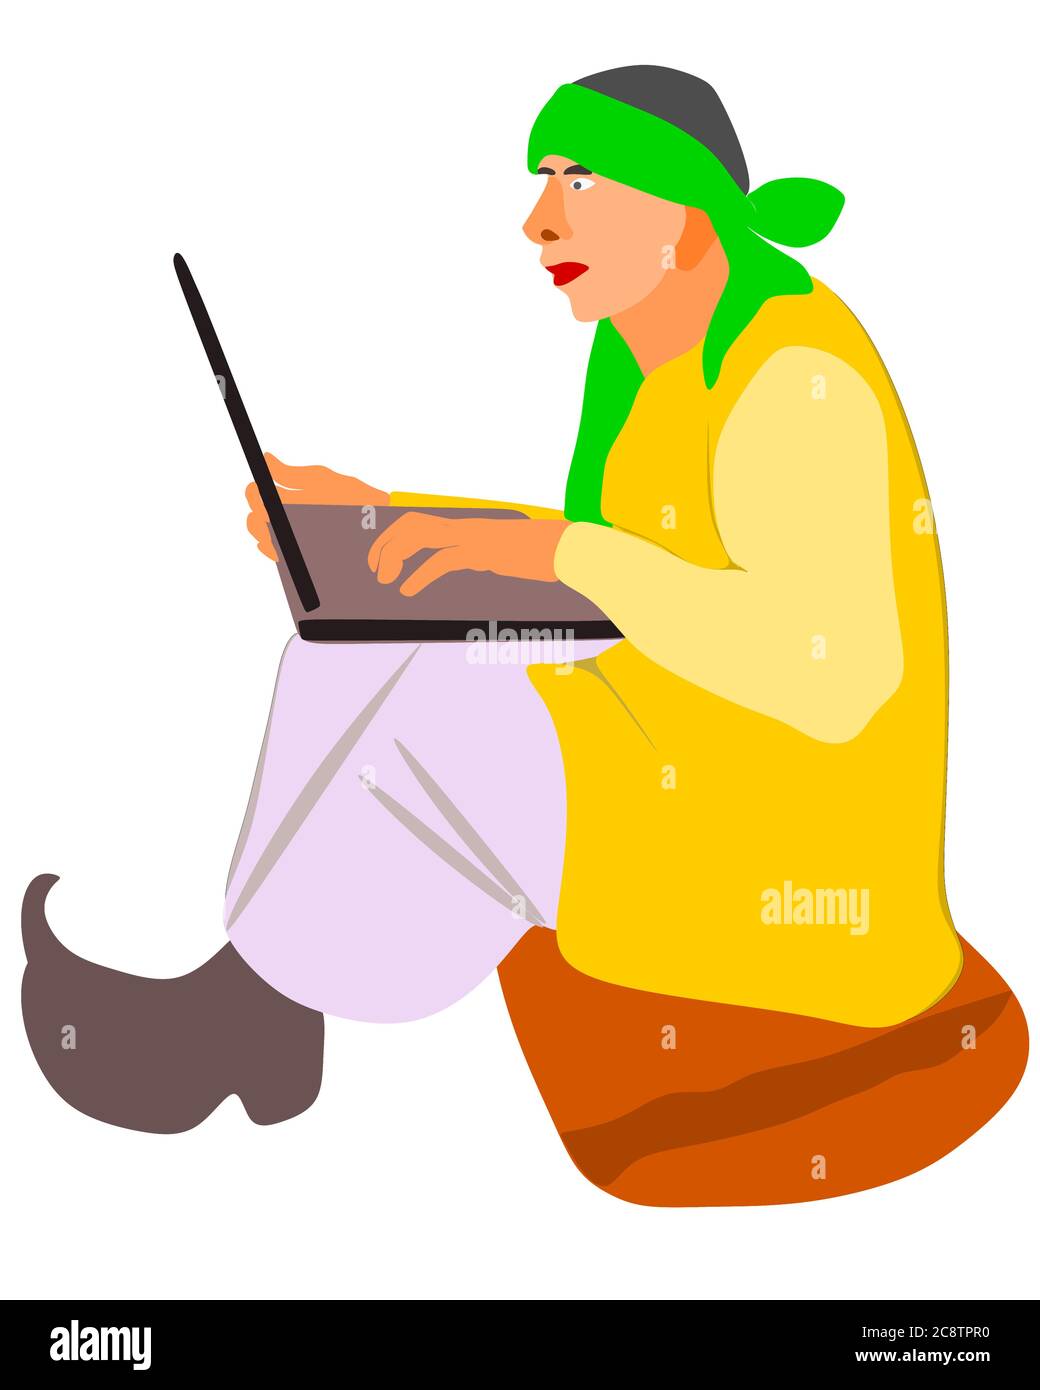 An indian village old poor farmer man cartoon operating computer technology wearing tradition dress. Stock Vector